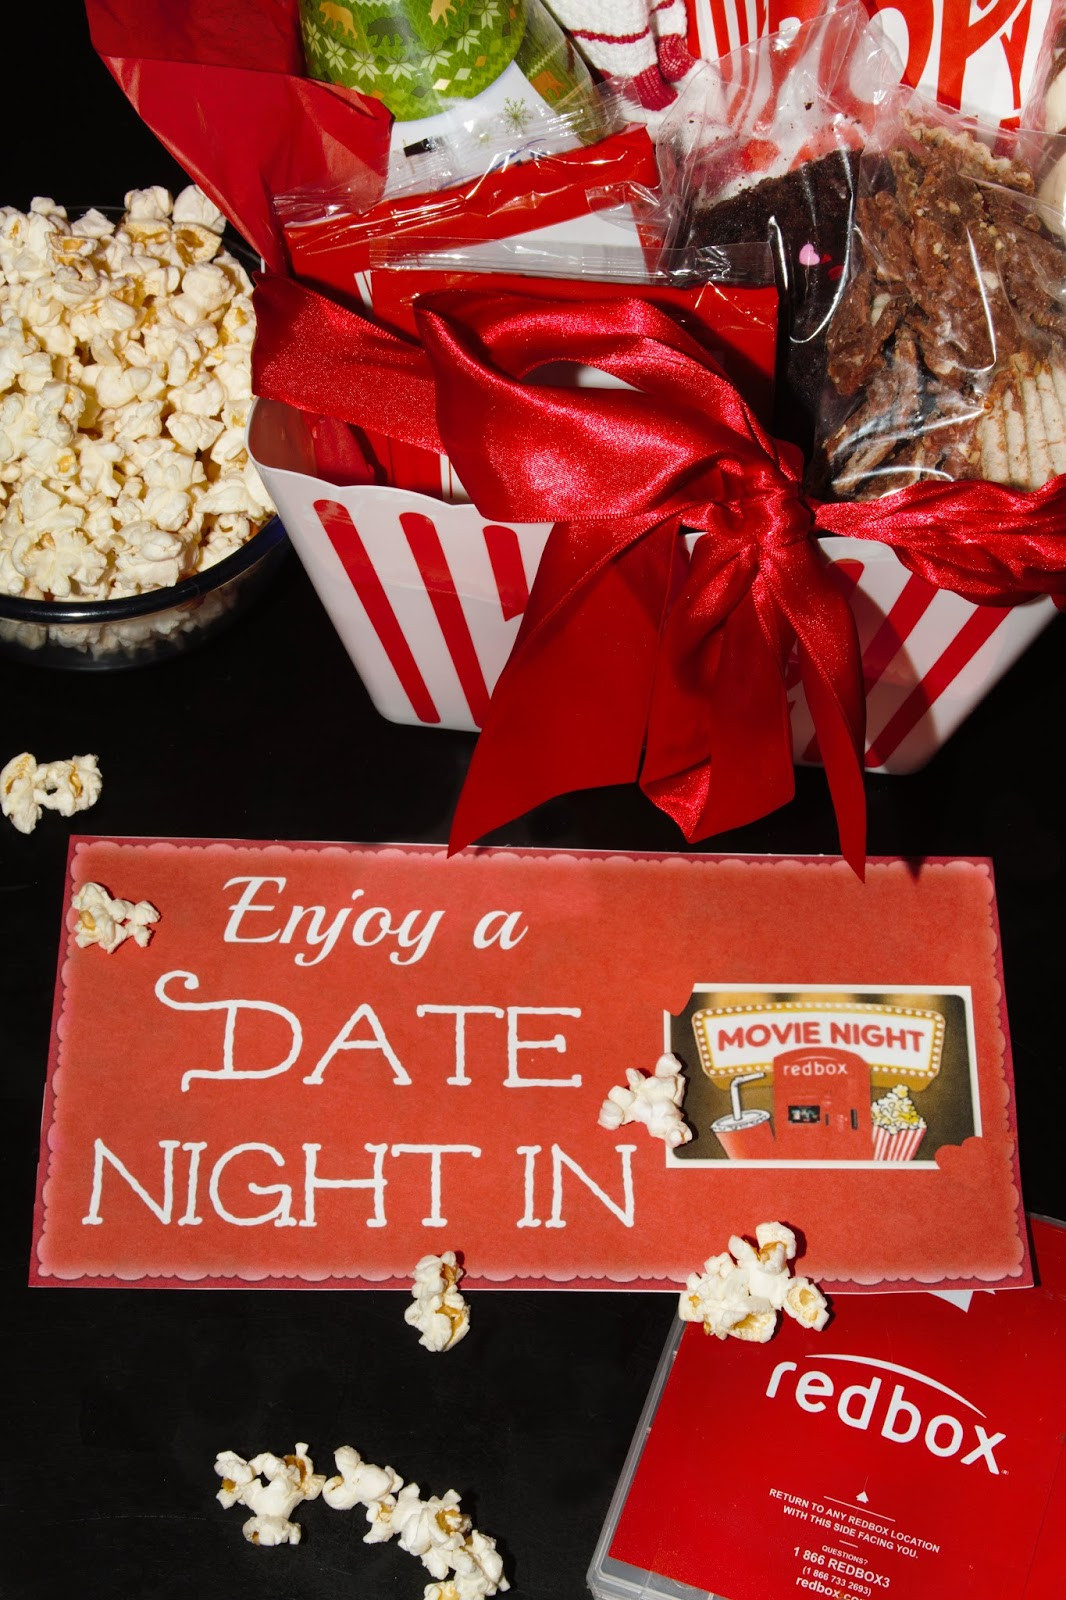 Date Night Gift Basket Ideas
 For the Love of Food DIY Date Night In Gift Basket with